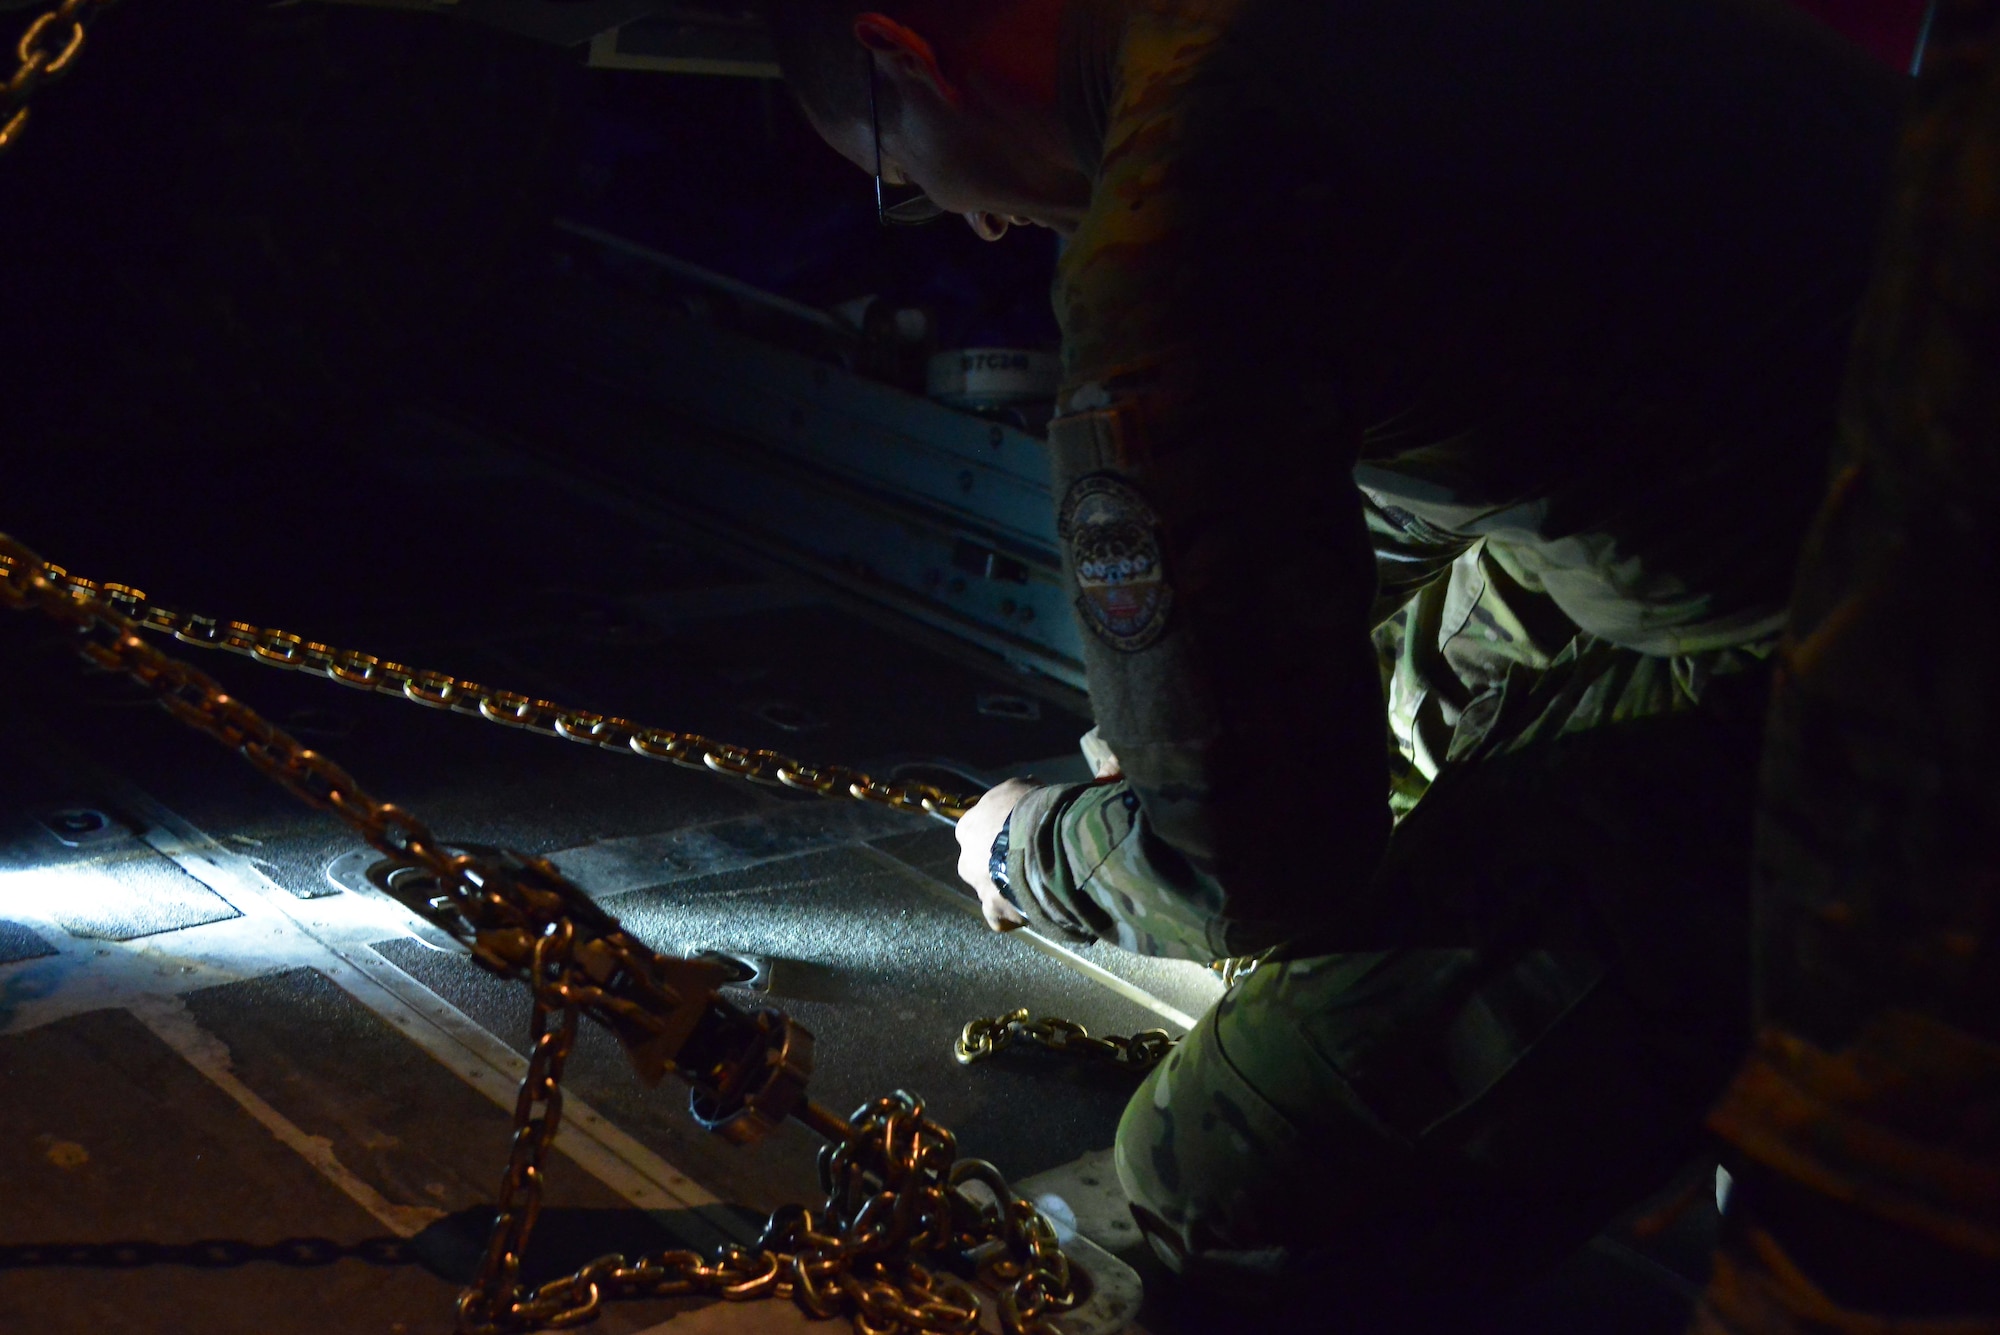 Tech Sgt. Wyatt Lewis, 746th Expeditionary Airlift Squadron crew chief, checks the tie-down of a P-19 Aircraft Rescue Fire Fighting vehicle inside a C-130J Hercules assigned to the 746th EAS October 12, 2015 at Al Udeid Air Base, Qatar. Aircrew from the 746th EAS received help from Airmen of the 8th Expeditionary Air Mobility Squadron to load the P-19 ARFF vehicle that will be used at a Forward Operating Base. (U.S. Air Force photo/Staff Sgt. Alexandre Montes)